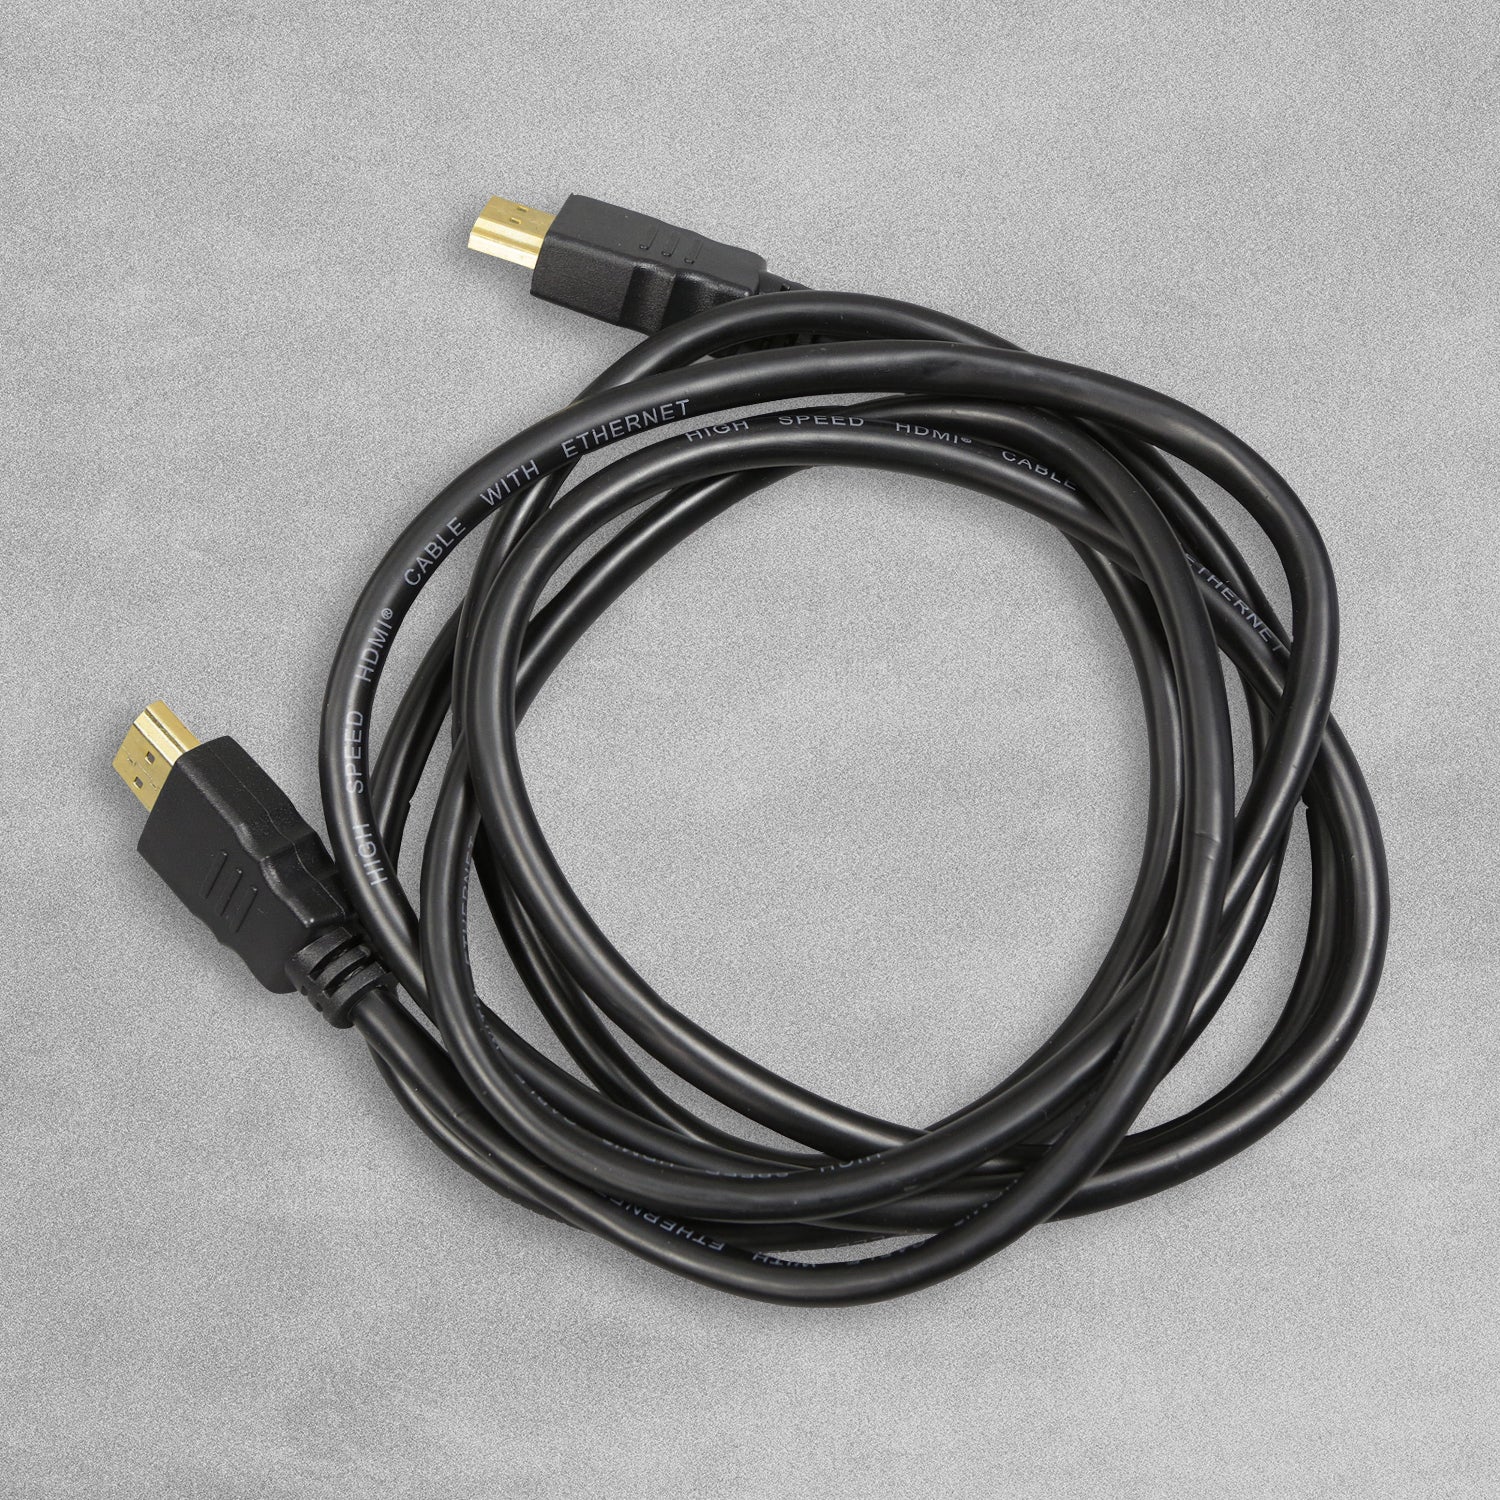 Status Gold HDMI Lead - 2 Metre Cable